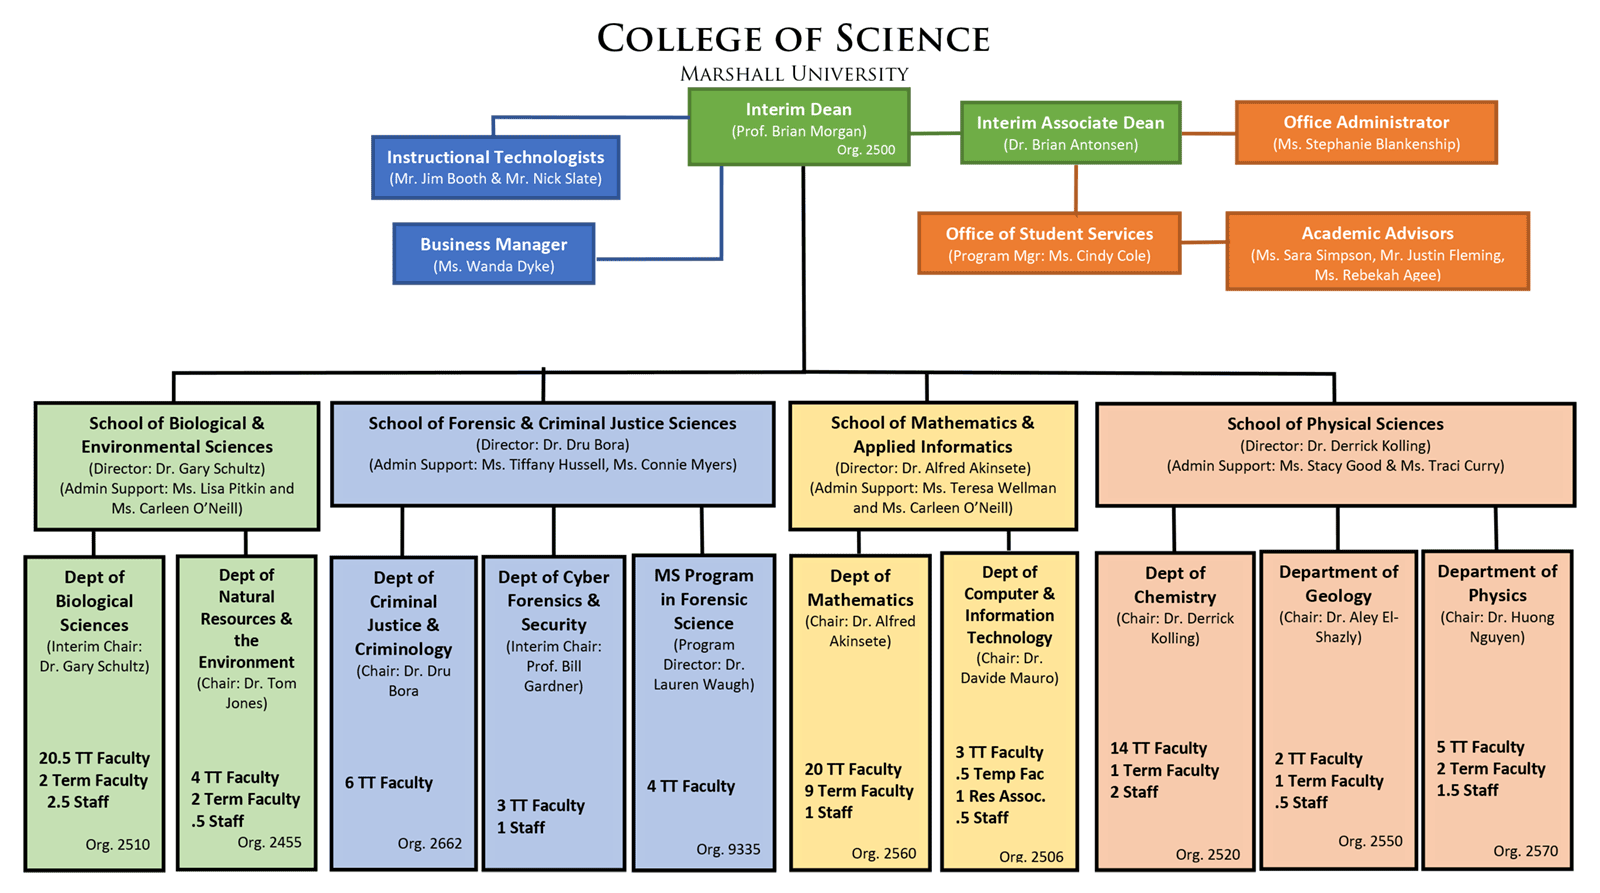 College of Science organizational chart